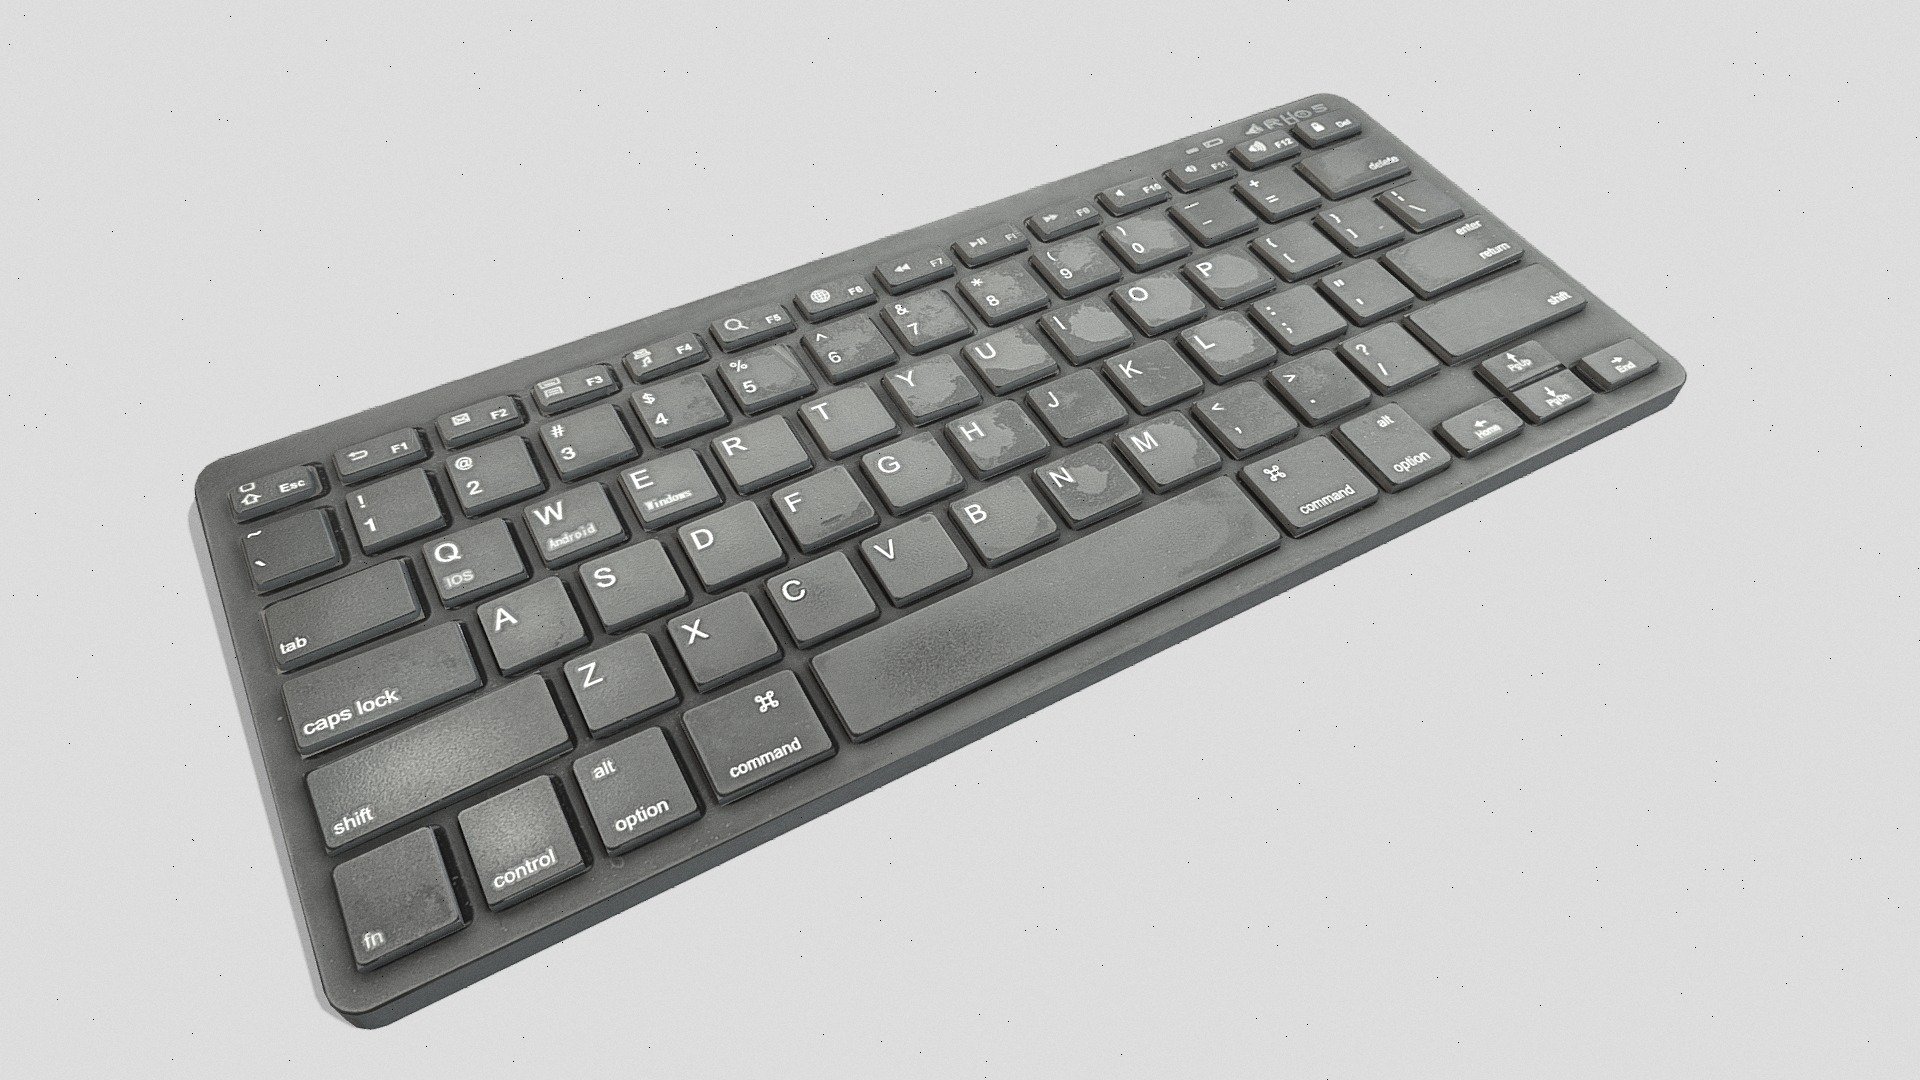 Computer keyboard model made in Blender. Used a real photo of a keyboard to texture it, making it look just like the real thing. It’s got all the keys you’d expect, and we even added some wear and tear to make it look extra realistic. Perfect for ads, 3D projects, or just having some digital keyboard fun 3d model